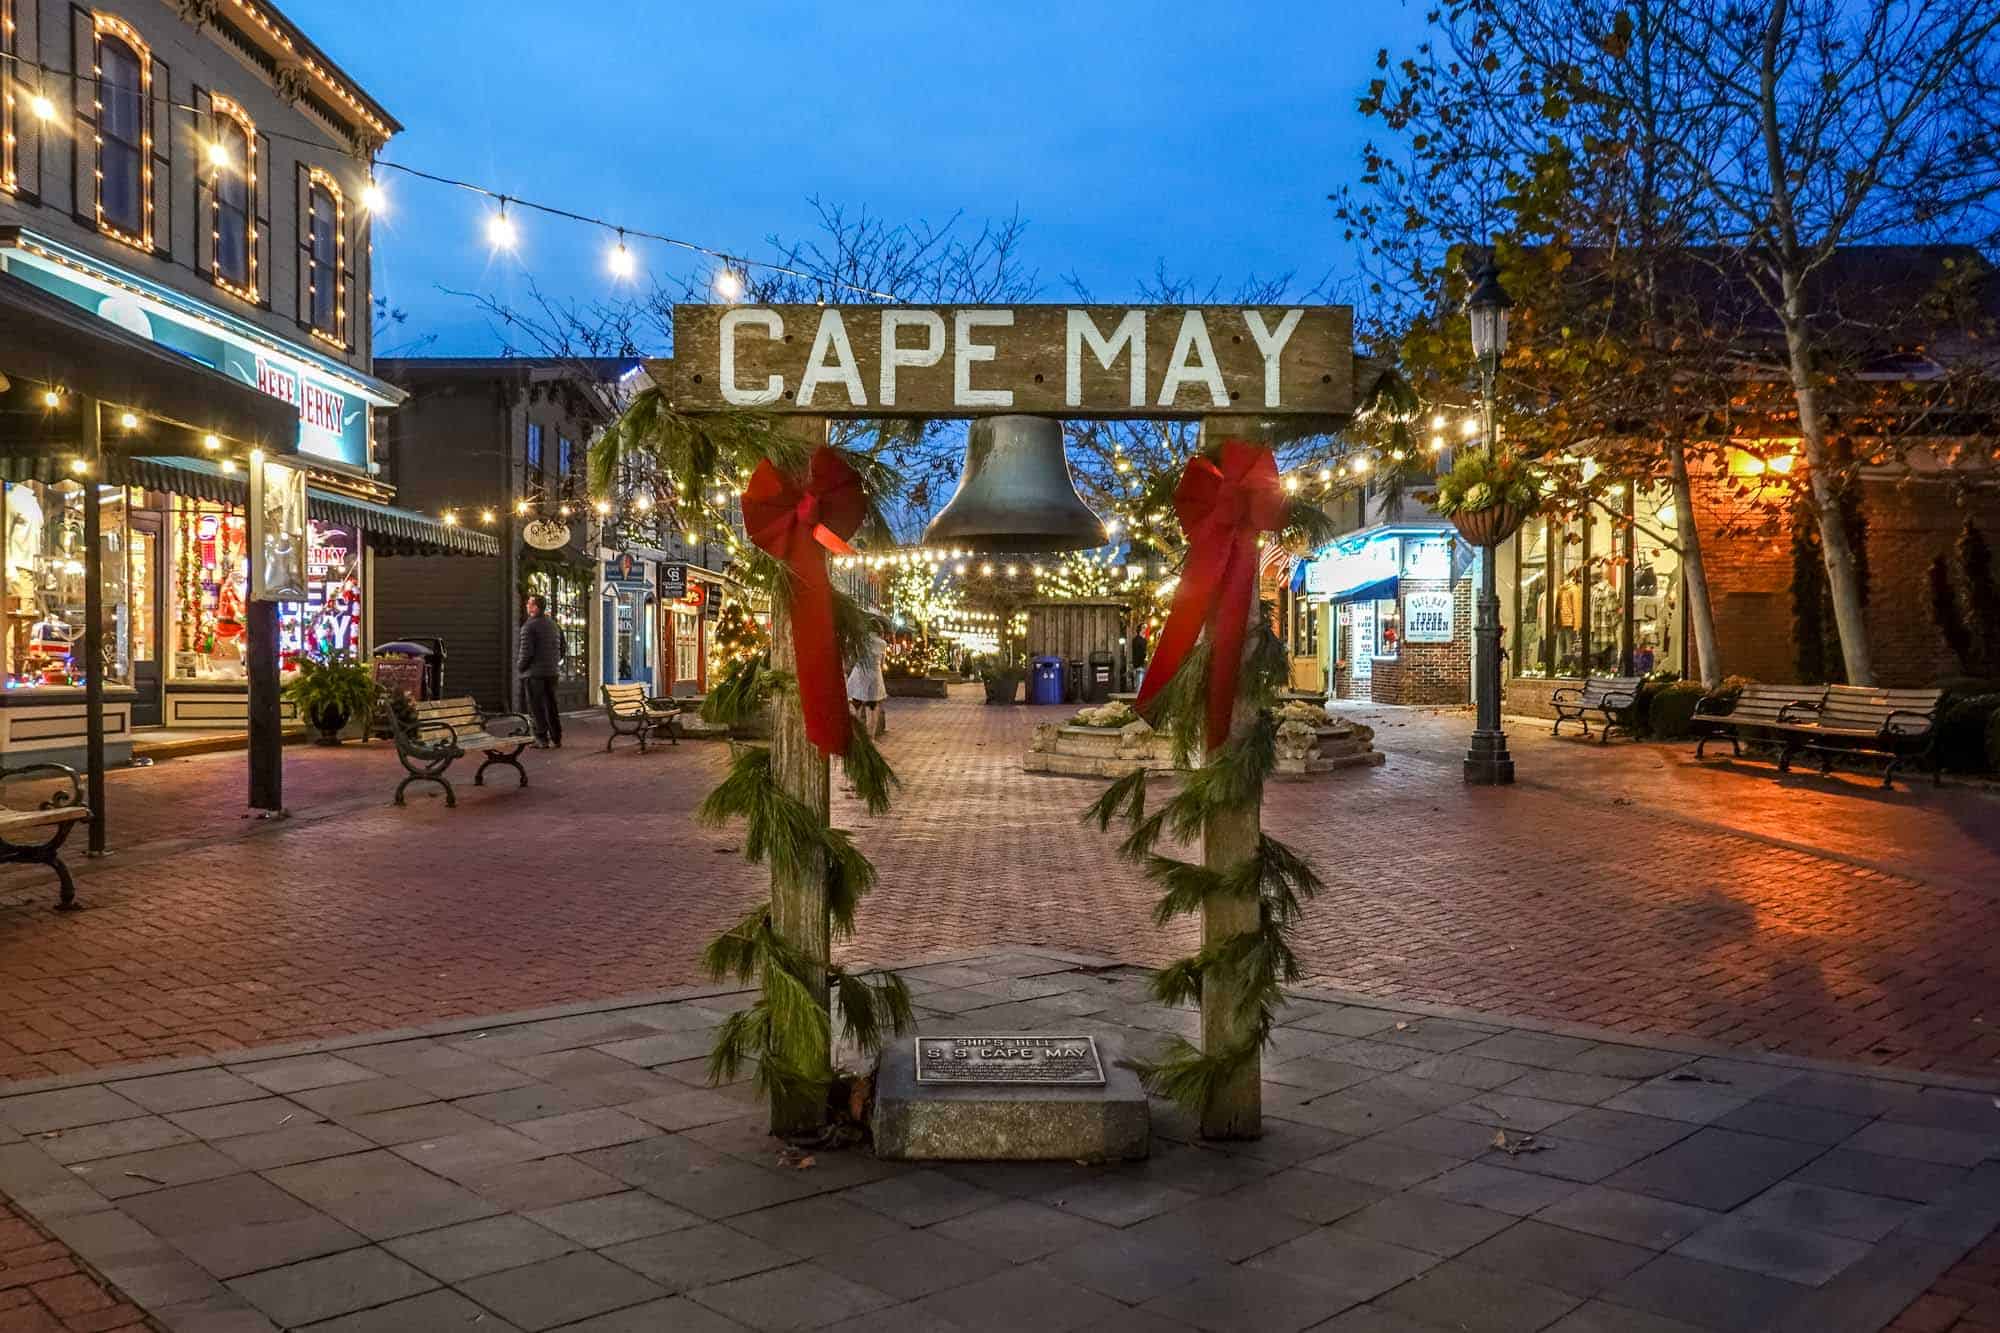 Sign for "Cape May" with a bell hanging from it at a pedestrian shopping mall